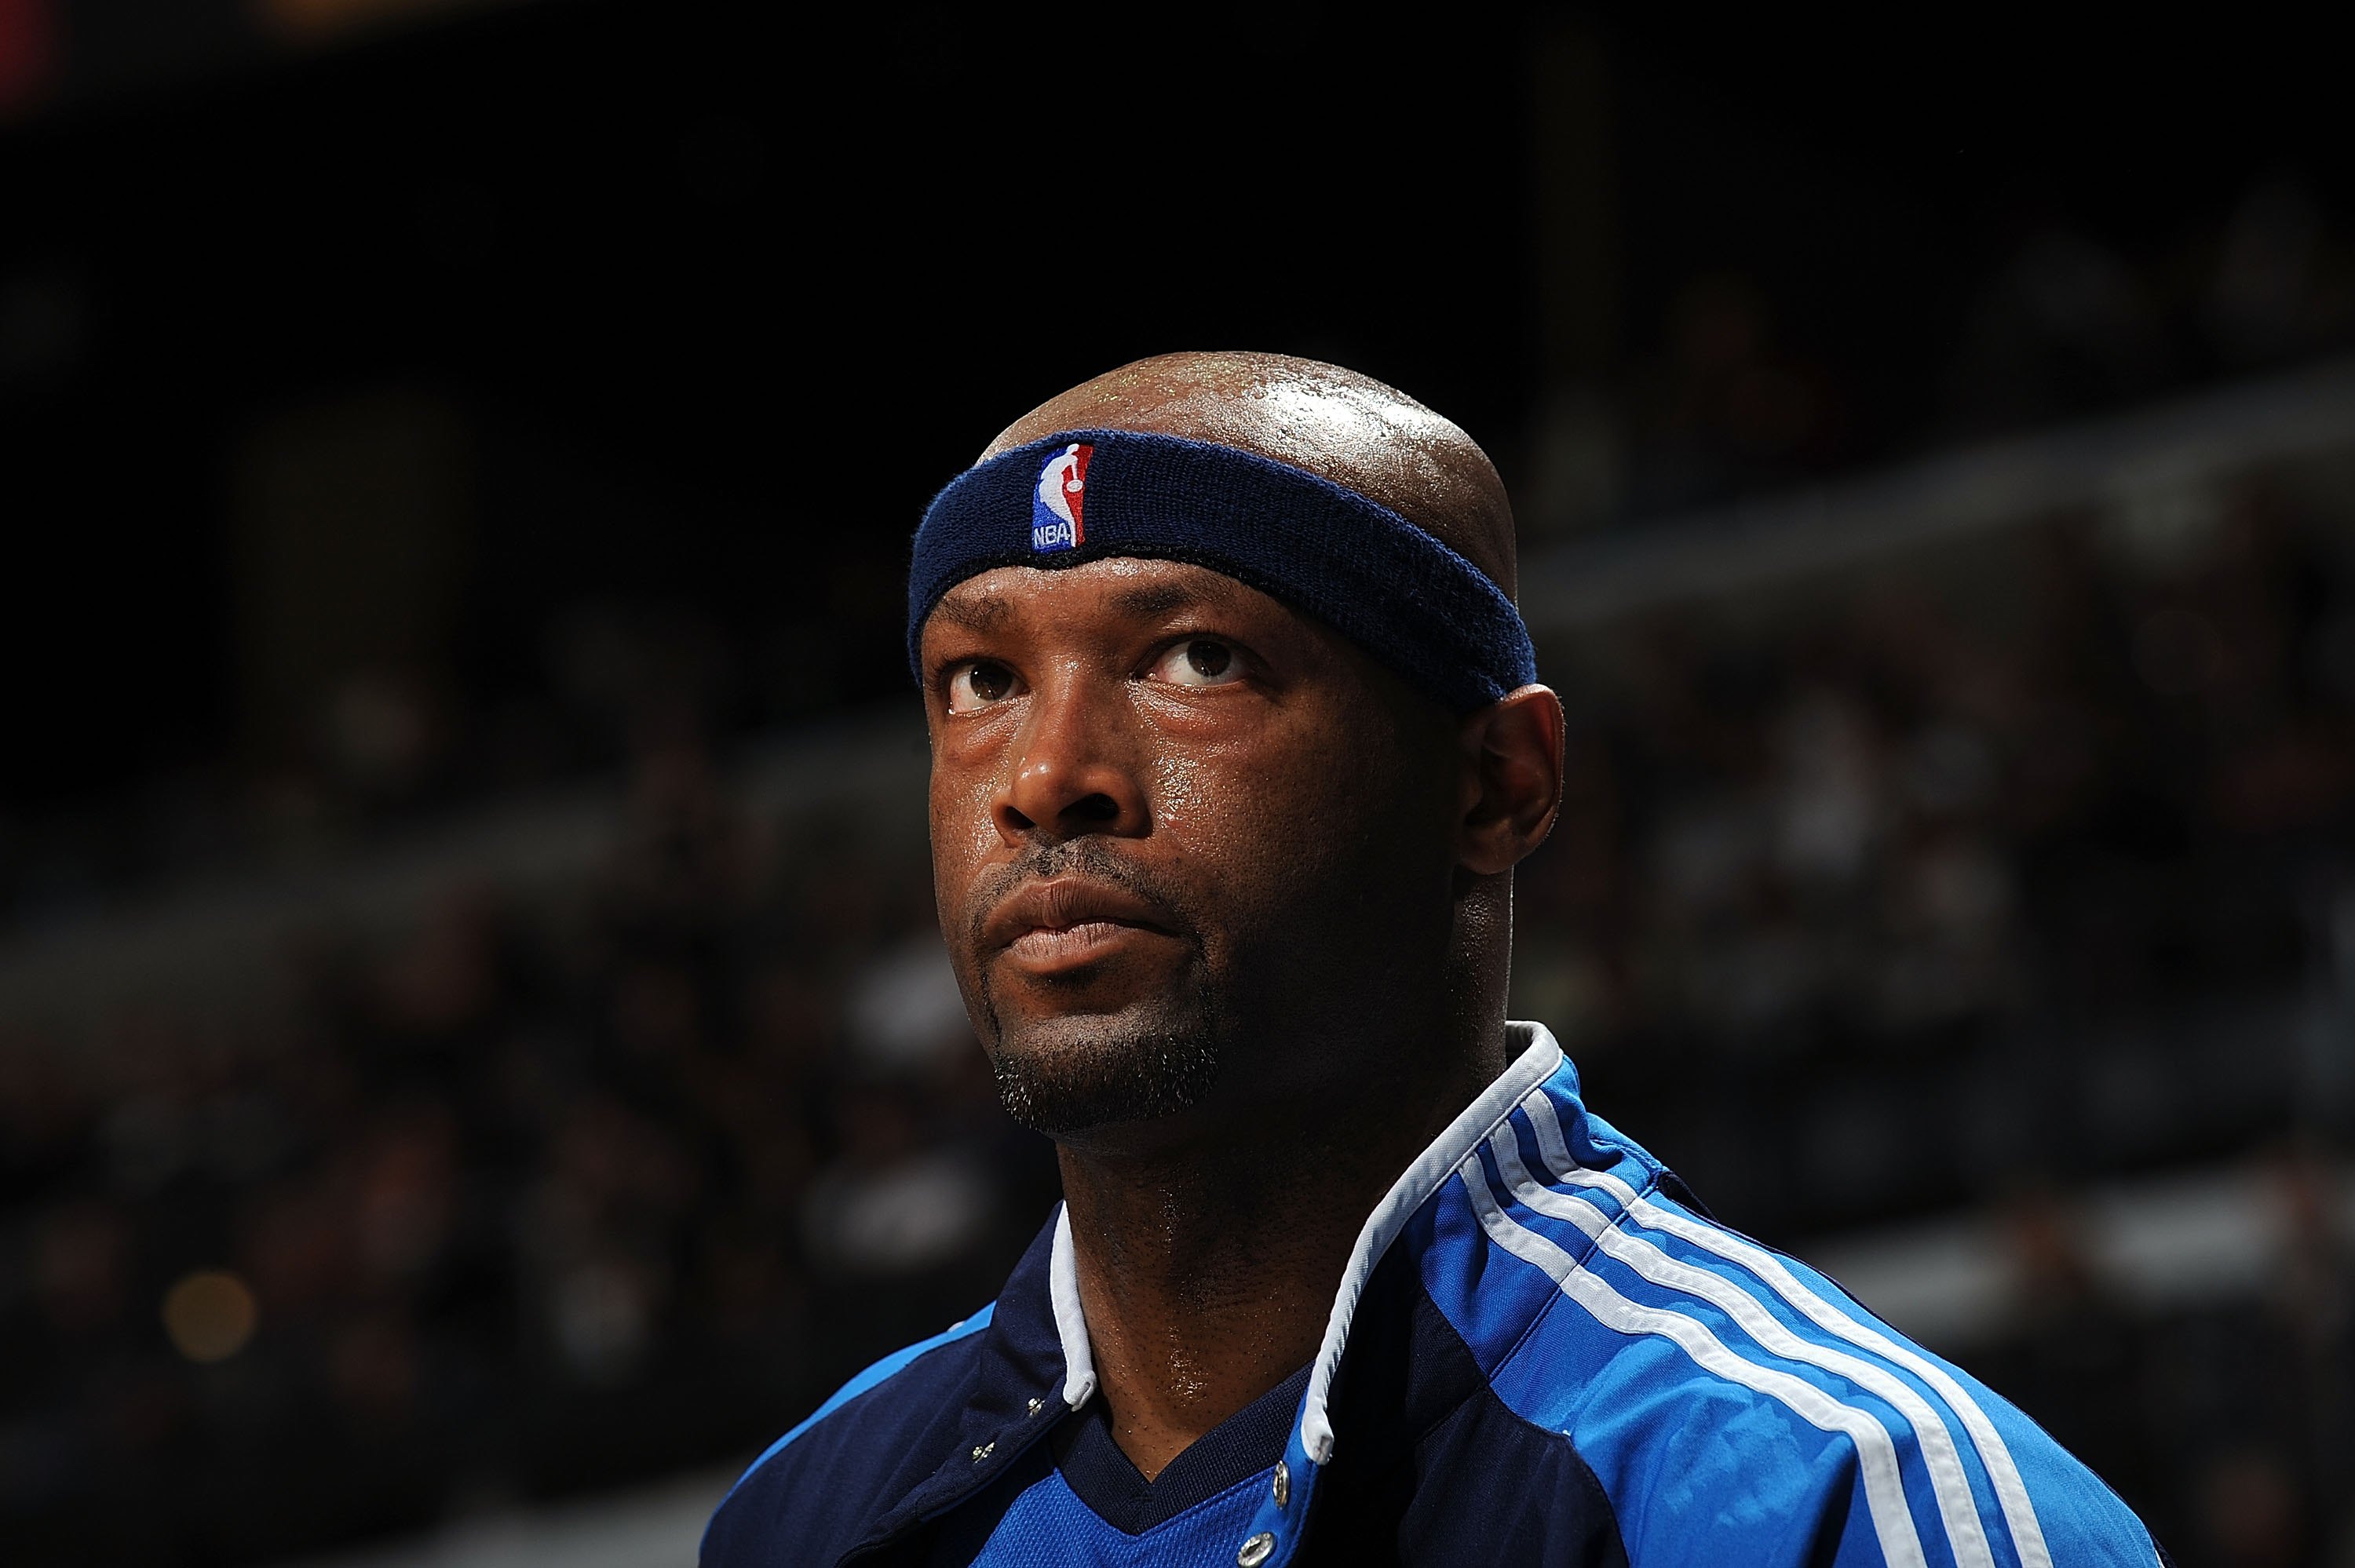 SAN ANTONIO - APRIL 28:  Center Erick Dampier #25 of the Dallas Mavericks during play against the San Antonio Spurs in Game Five of the Western Conference Quarterfinals during the 2009 NBA Playoffs at AT&T Center on April 28, 2009 in San Antonio, Texas. N